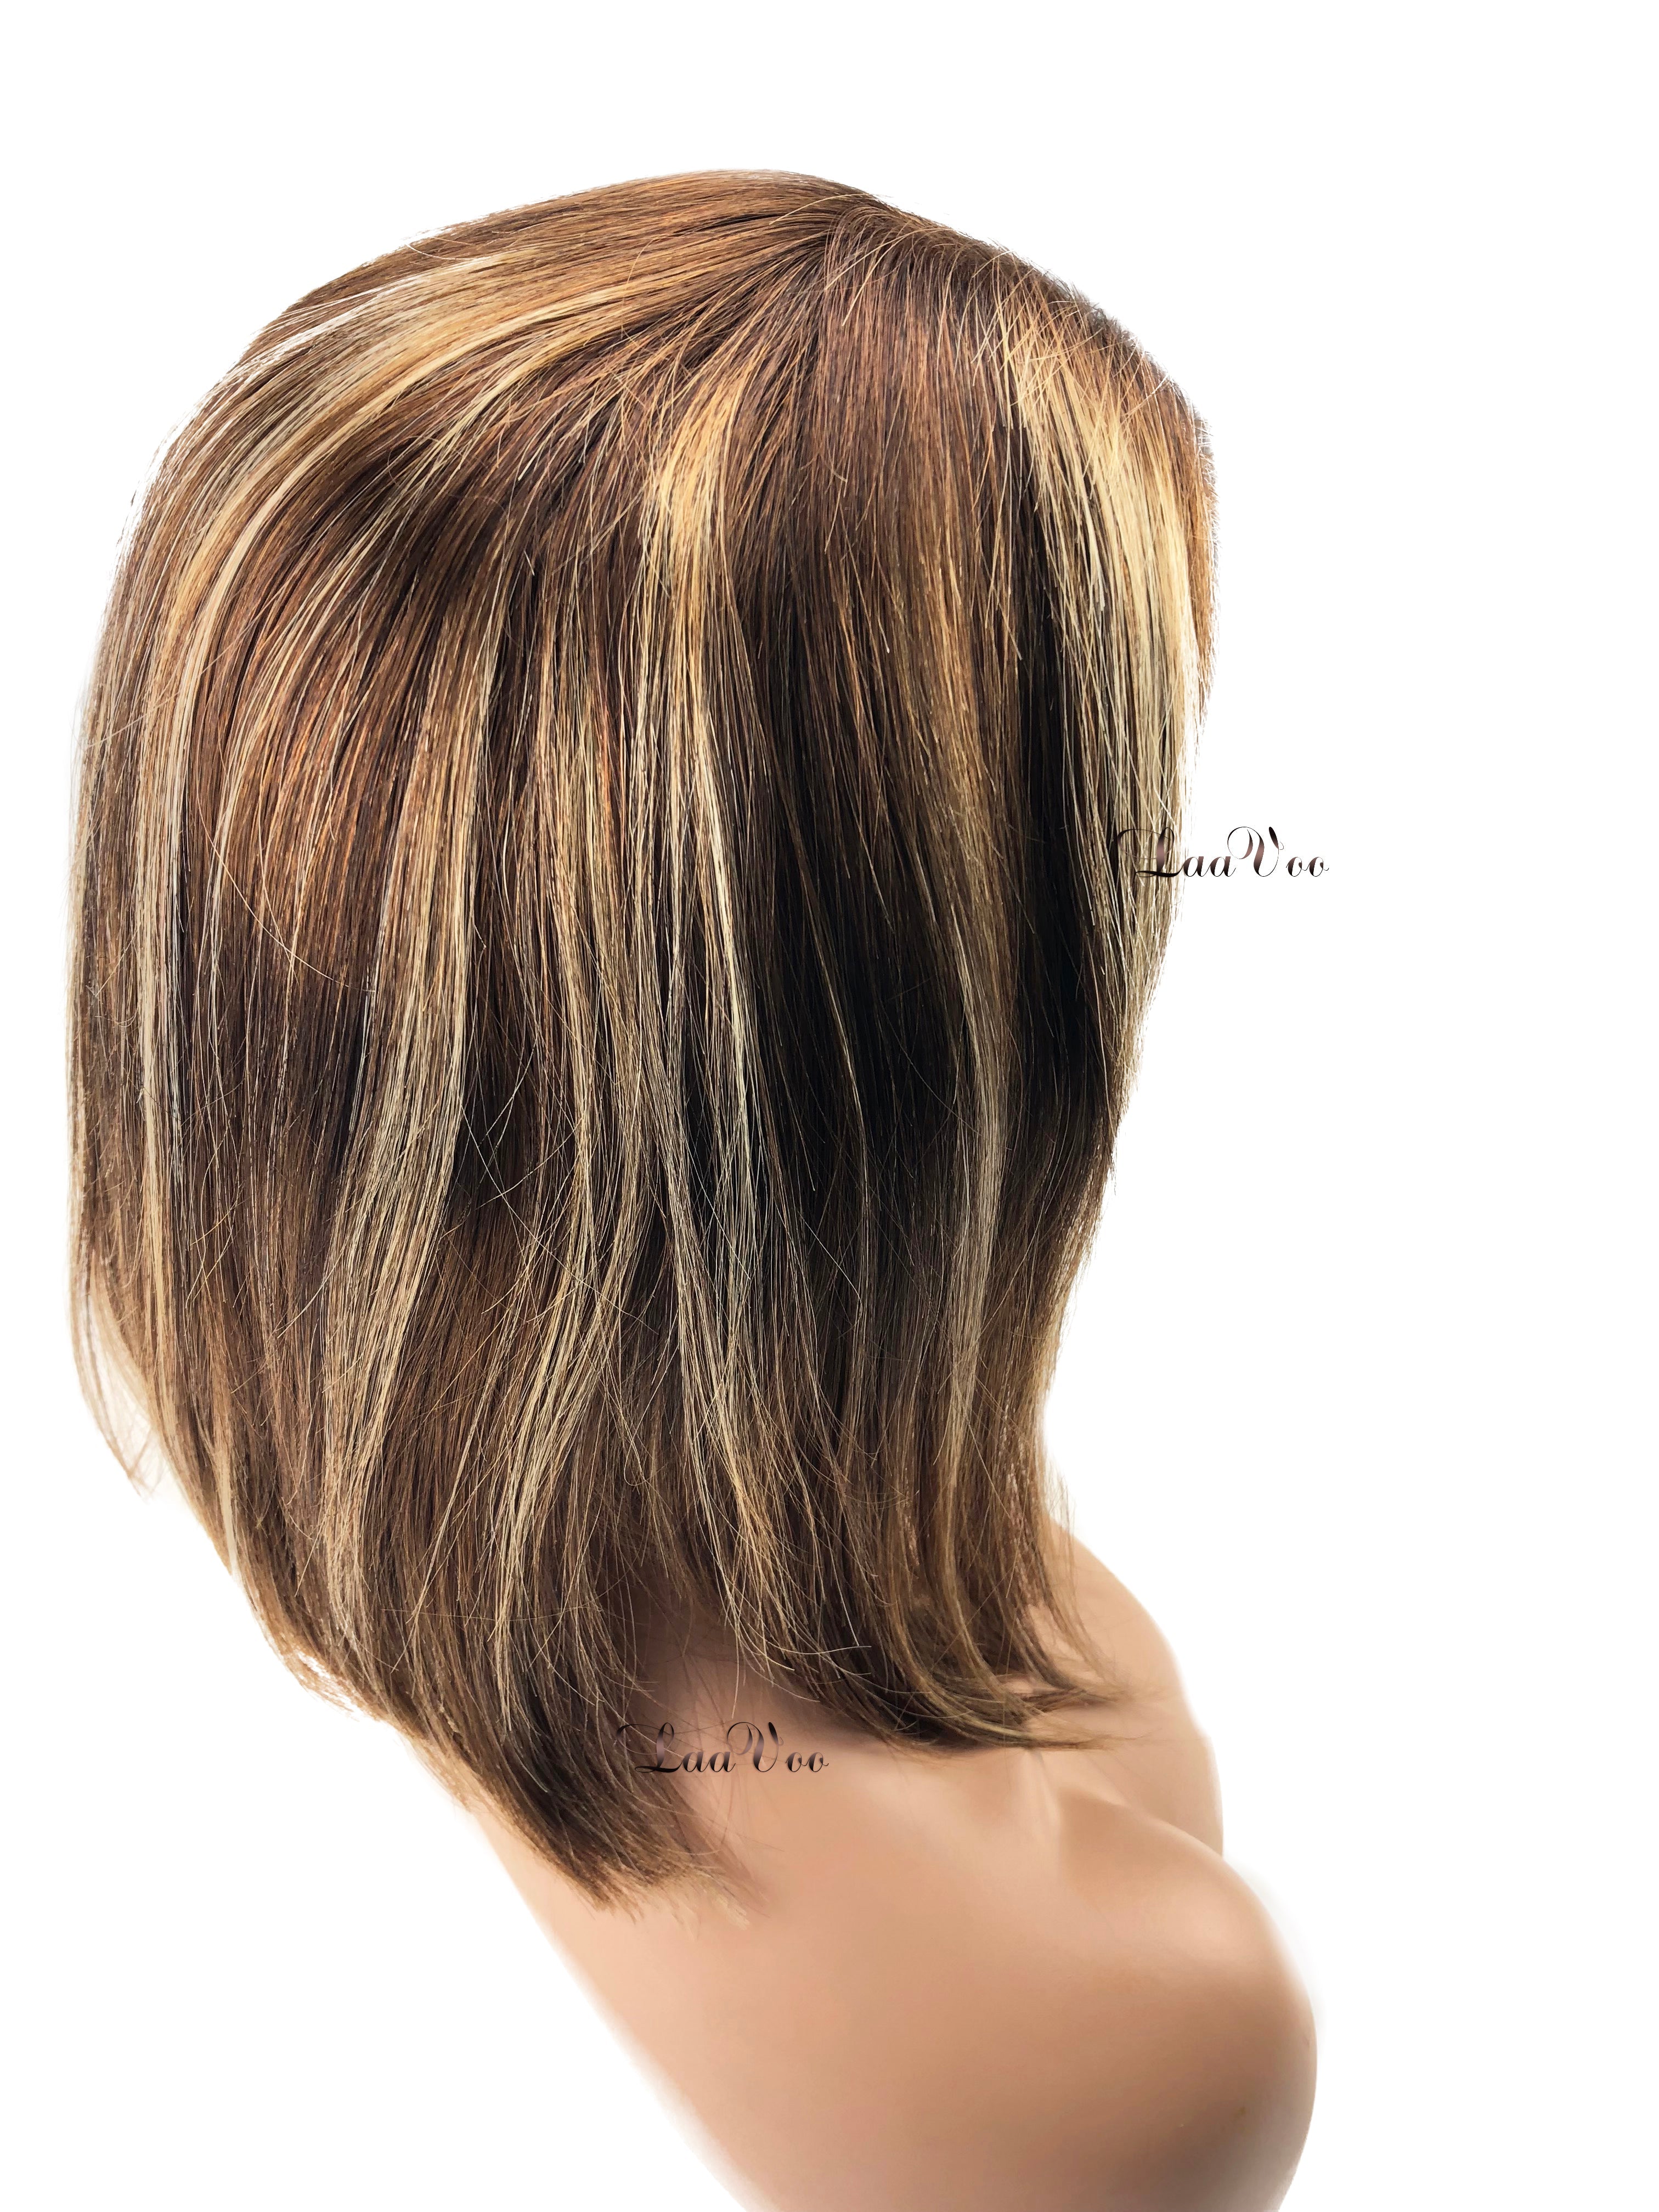 Lace Front Bob Wig Dark Brown Highlighted Caramel Blonde 130% Density Straight Free Part P4/27 - LaaVoo